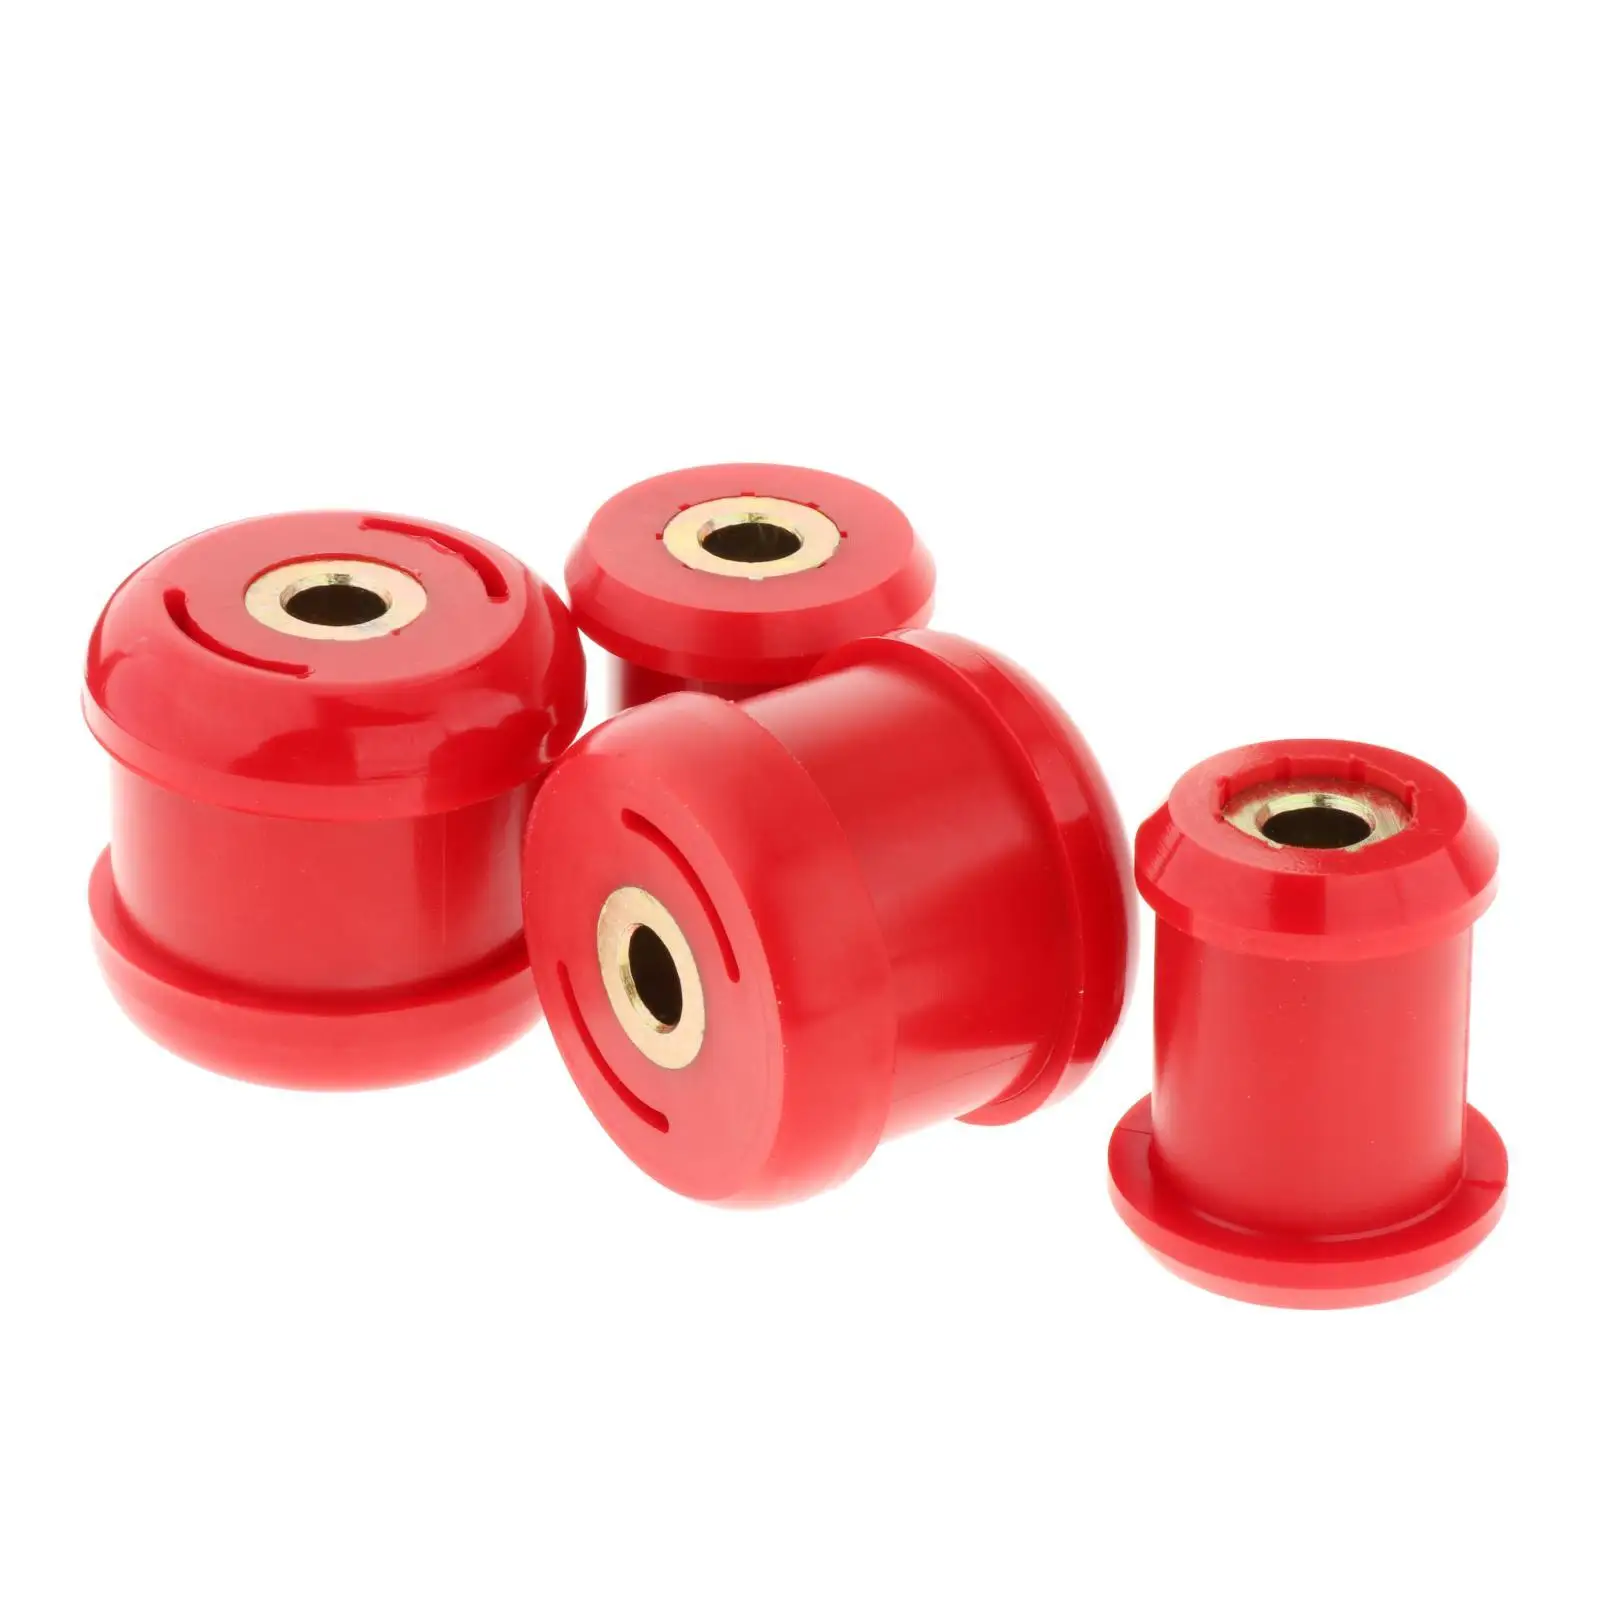 Control Arm Bushing Accessories Replace 71mm Fits for Honda Civic 2001-2005